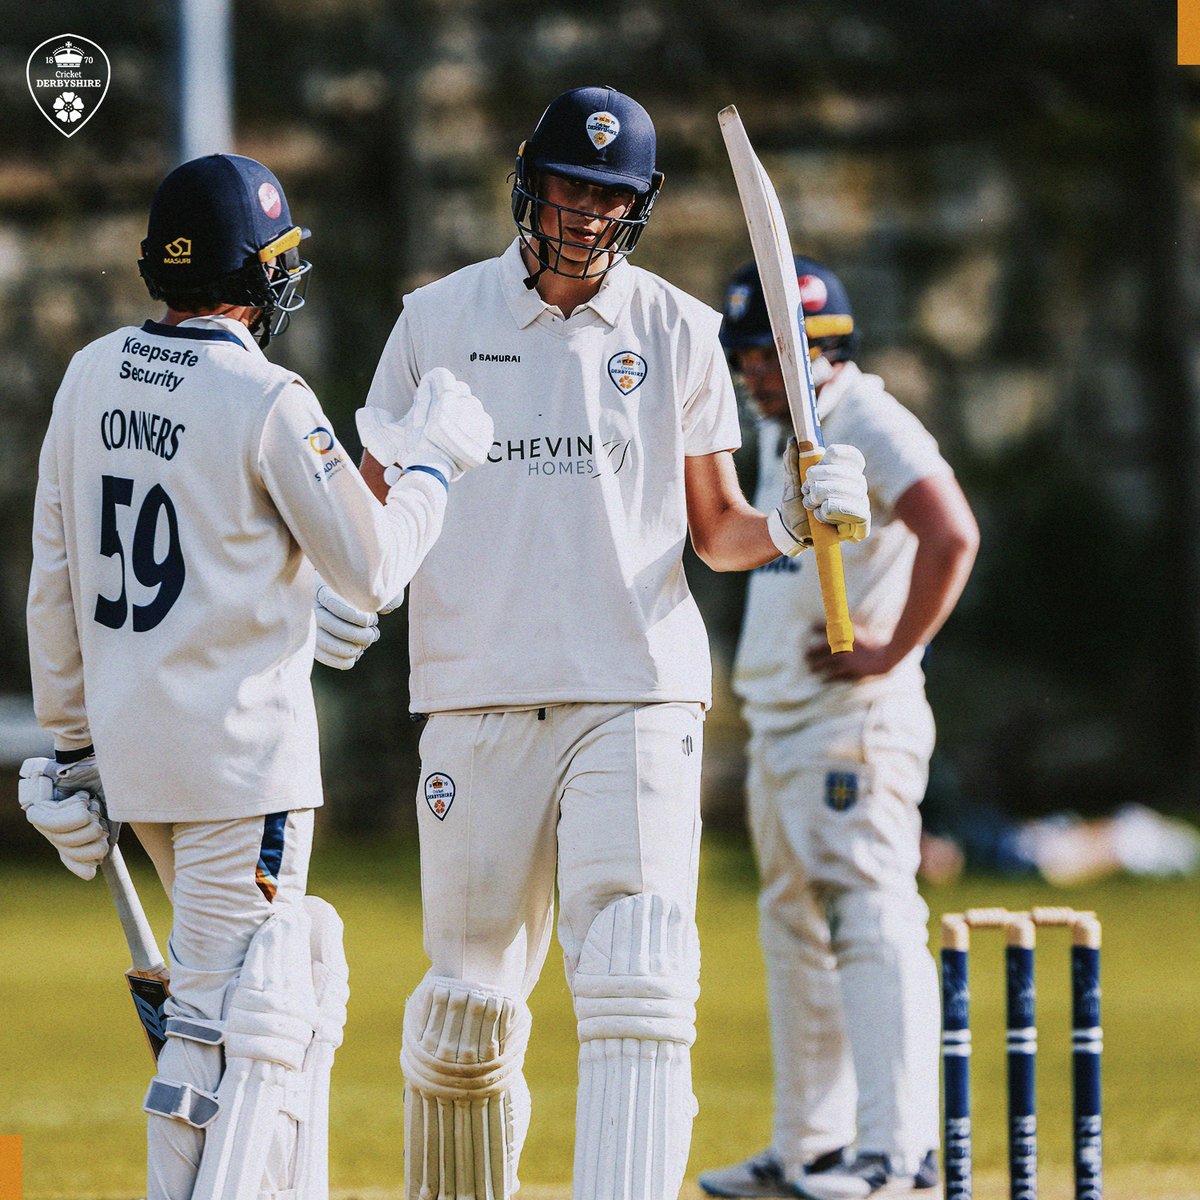 𝐀 𝐦𝐚𝐭𝐜𝐡-𝐰𝐢𝐧𝐧𝐢𝐧𝐠 𝐤𝐧𝐨𝐜𝐤 👏 Harry Moore struck an unbeaten 64 off 68 balls yesterday to guide the Second XI to victory! #WeAreDerbyshire